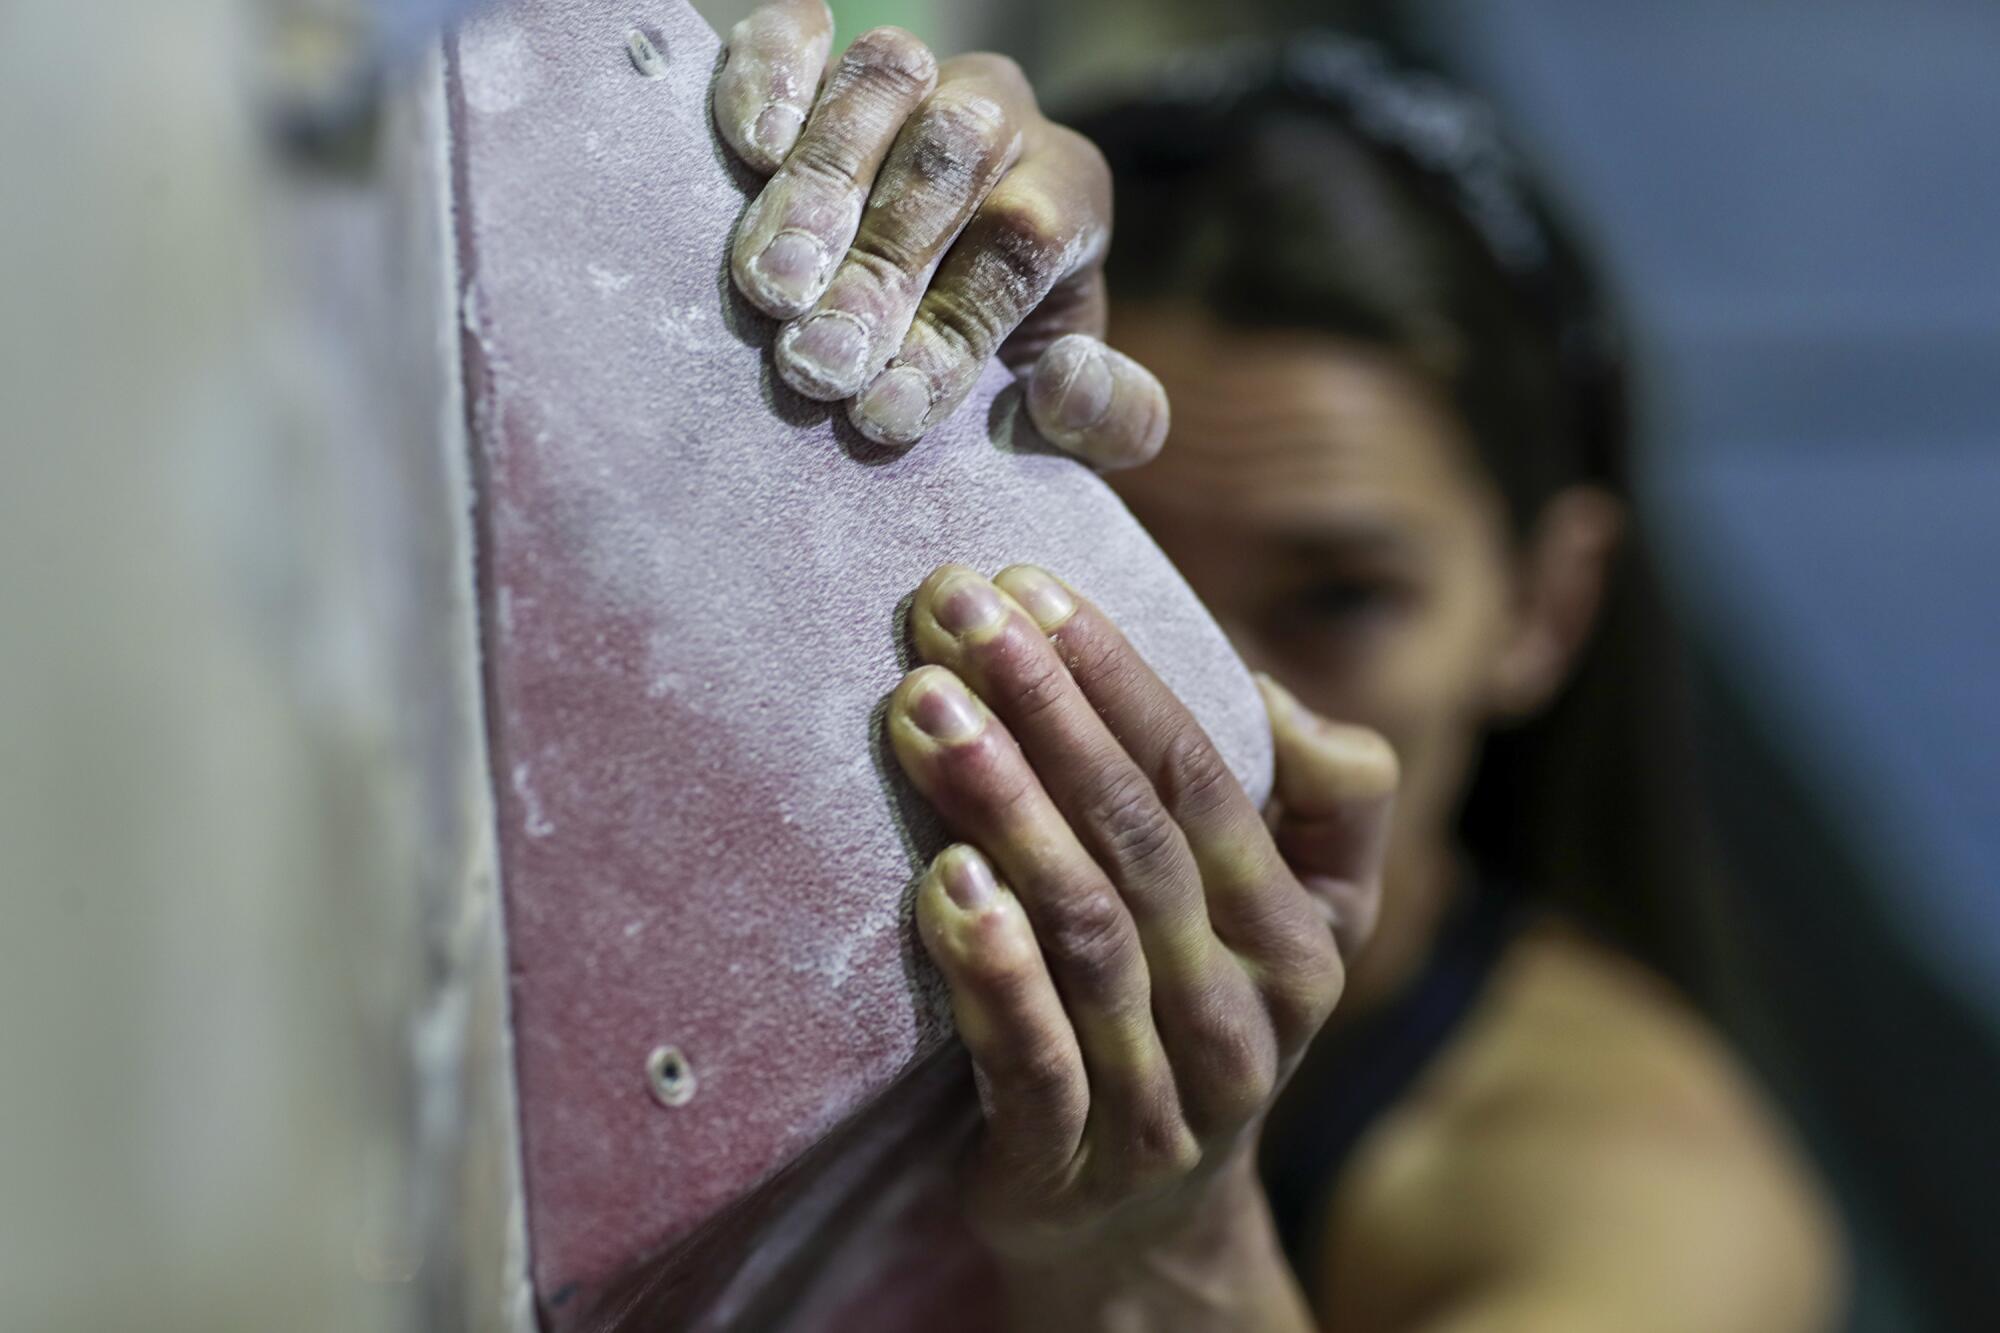 The hands of U.S. sports climbing Olympian Kyra Condie.